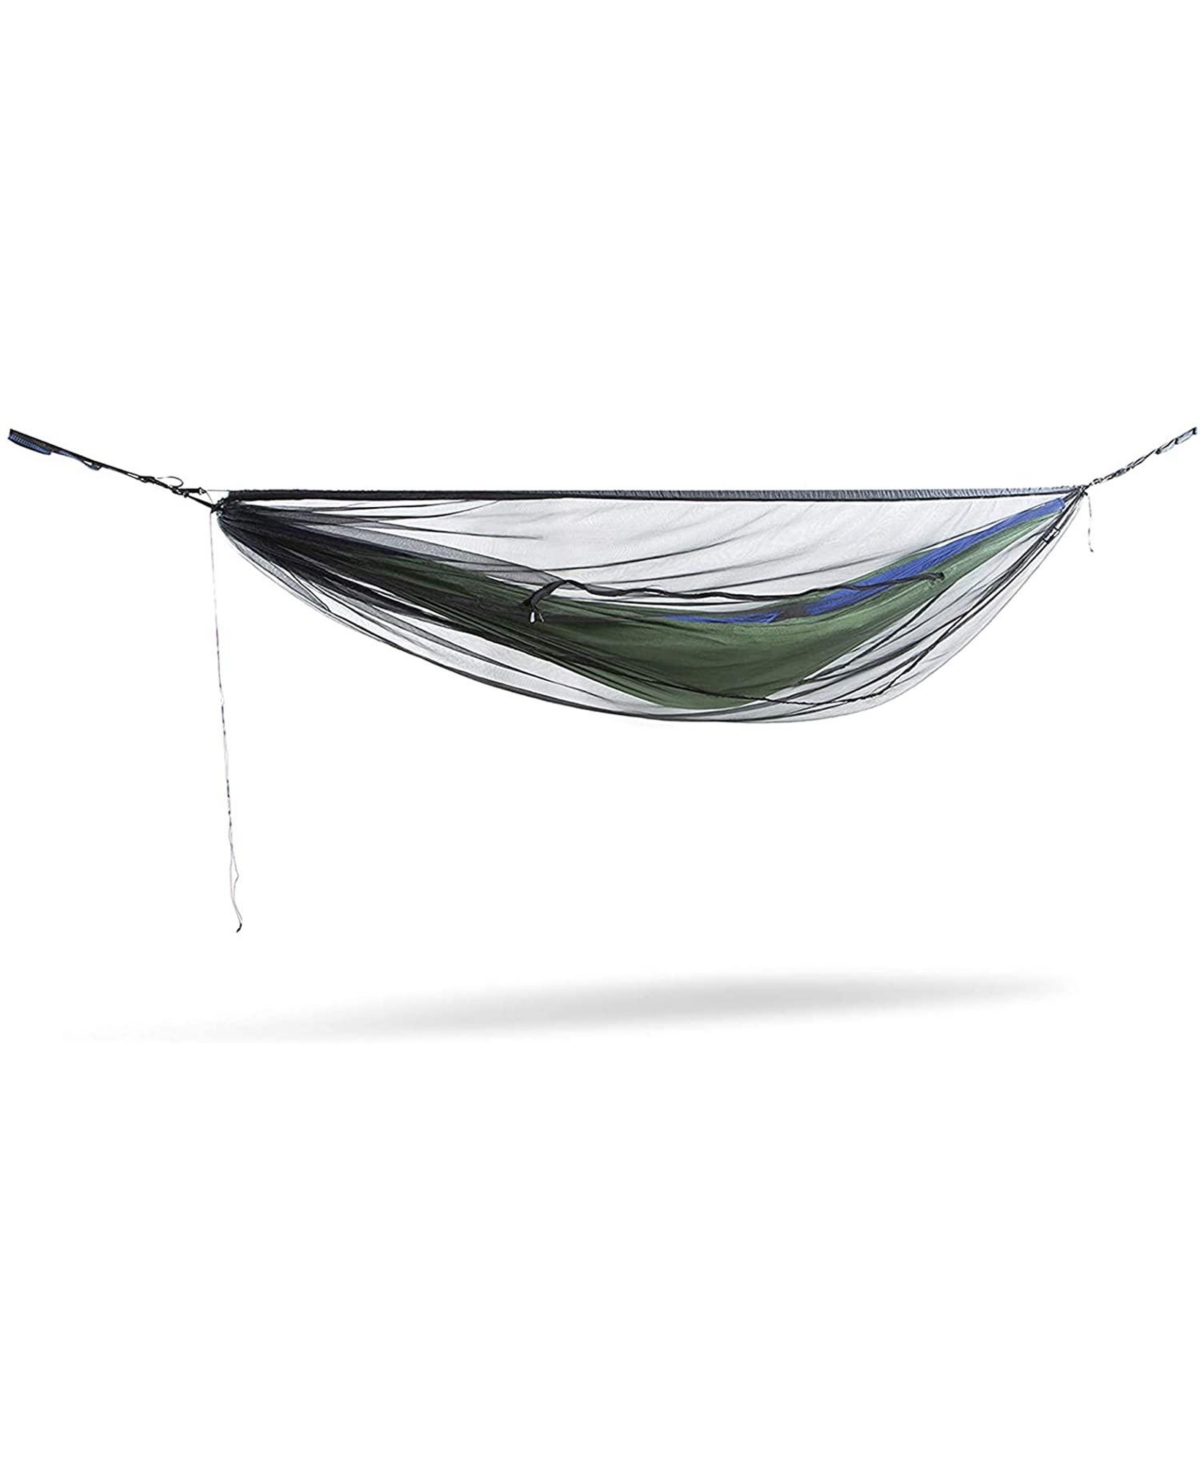 Guardian Sl Bug Net - Lightweight Hammock Netting - For Camping, Hiking, Backpacking, Travel, a Festival, or the Beach - Grey - Grey